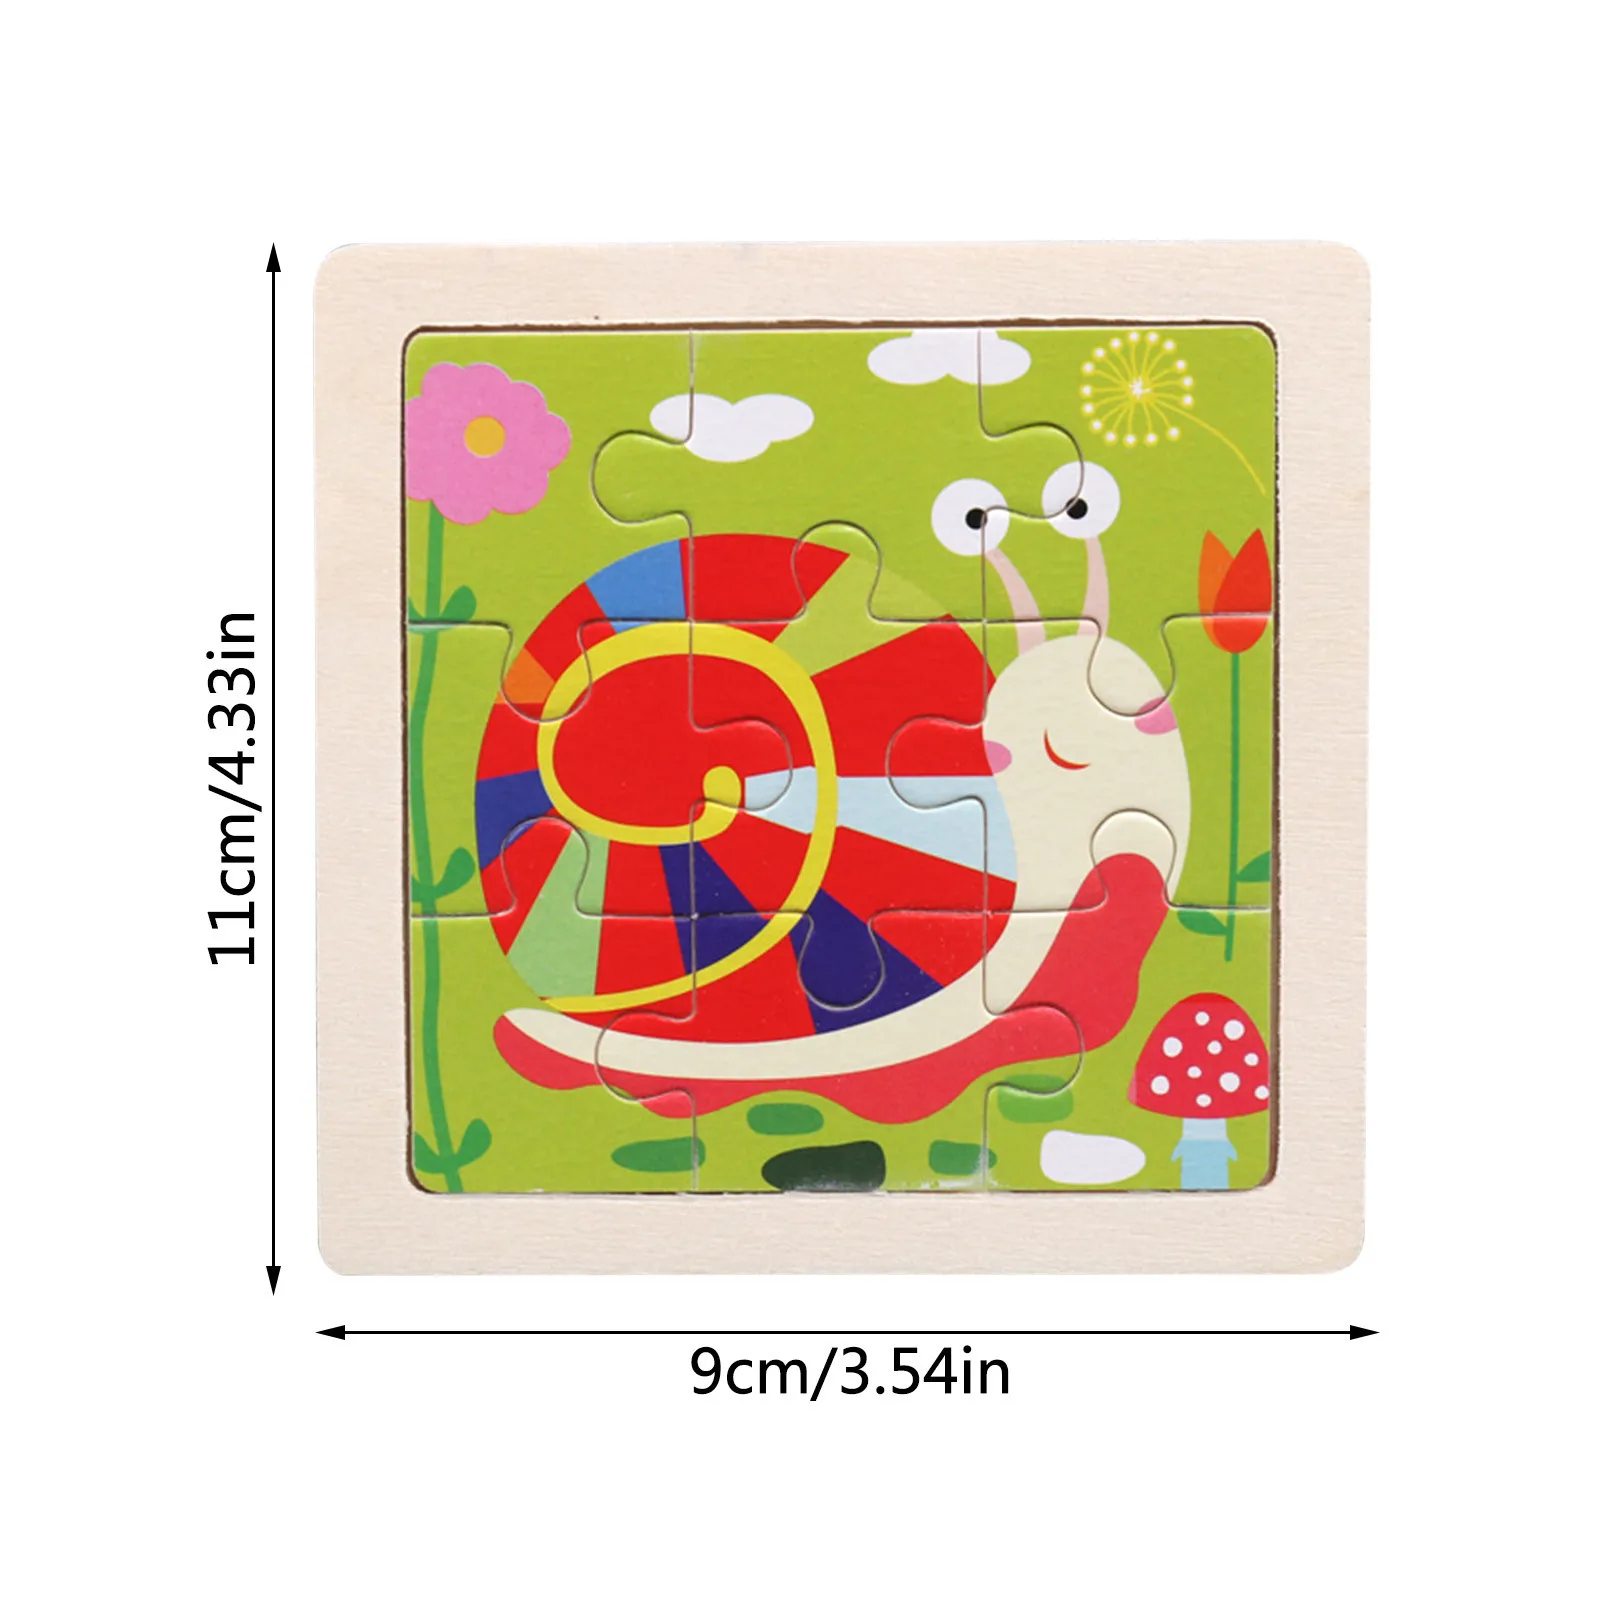 

Mini Size Jigsaw Wooden 3d Puzzle Insect Theme Tangram Shapes Learning Cartoon Animal Self-assembling Intelligence Puzzle Toys